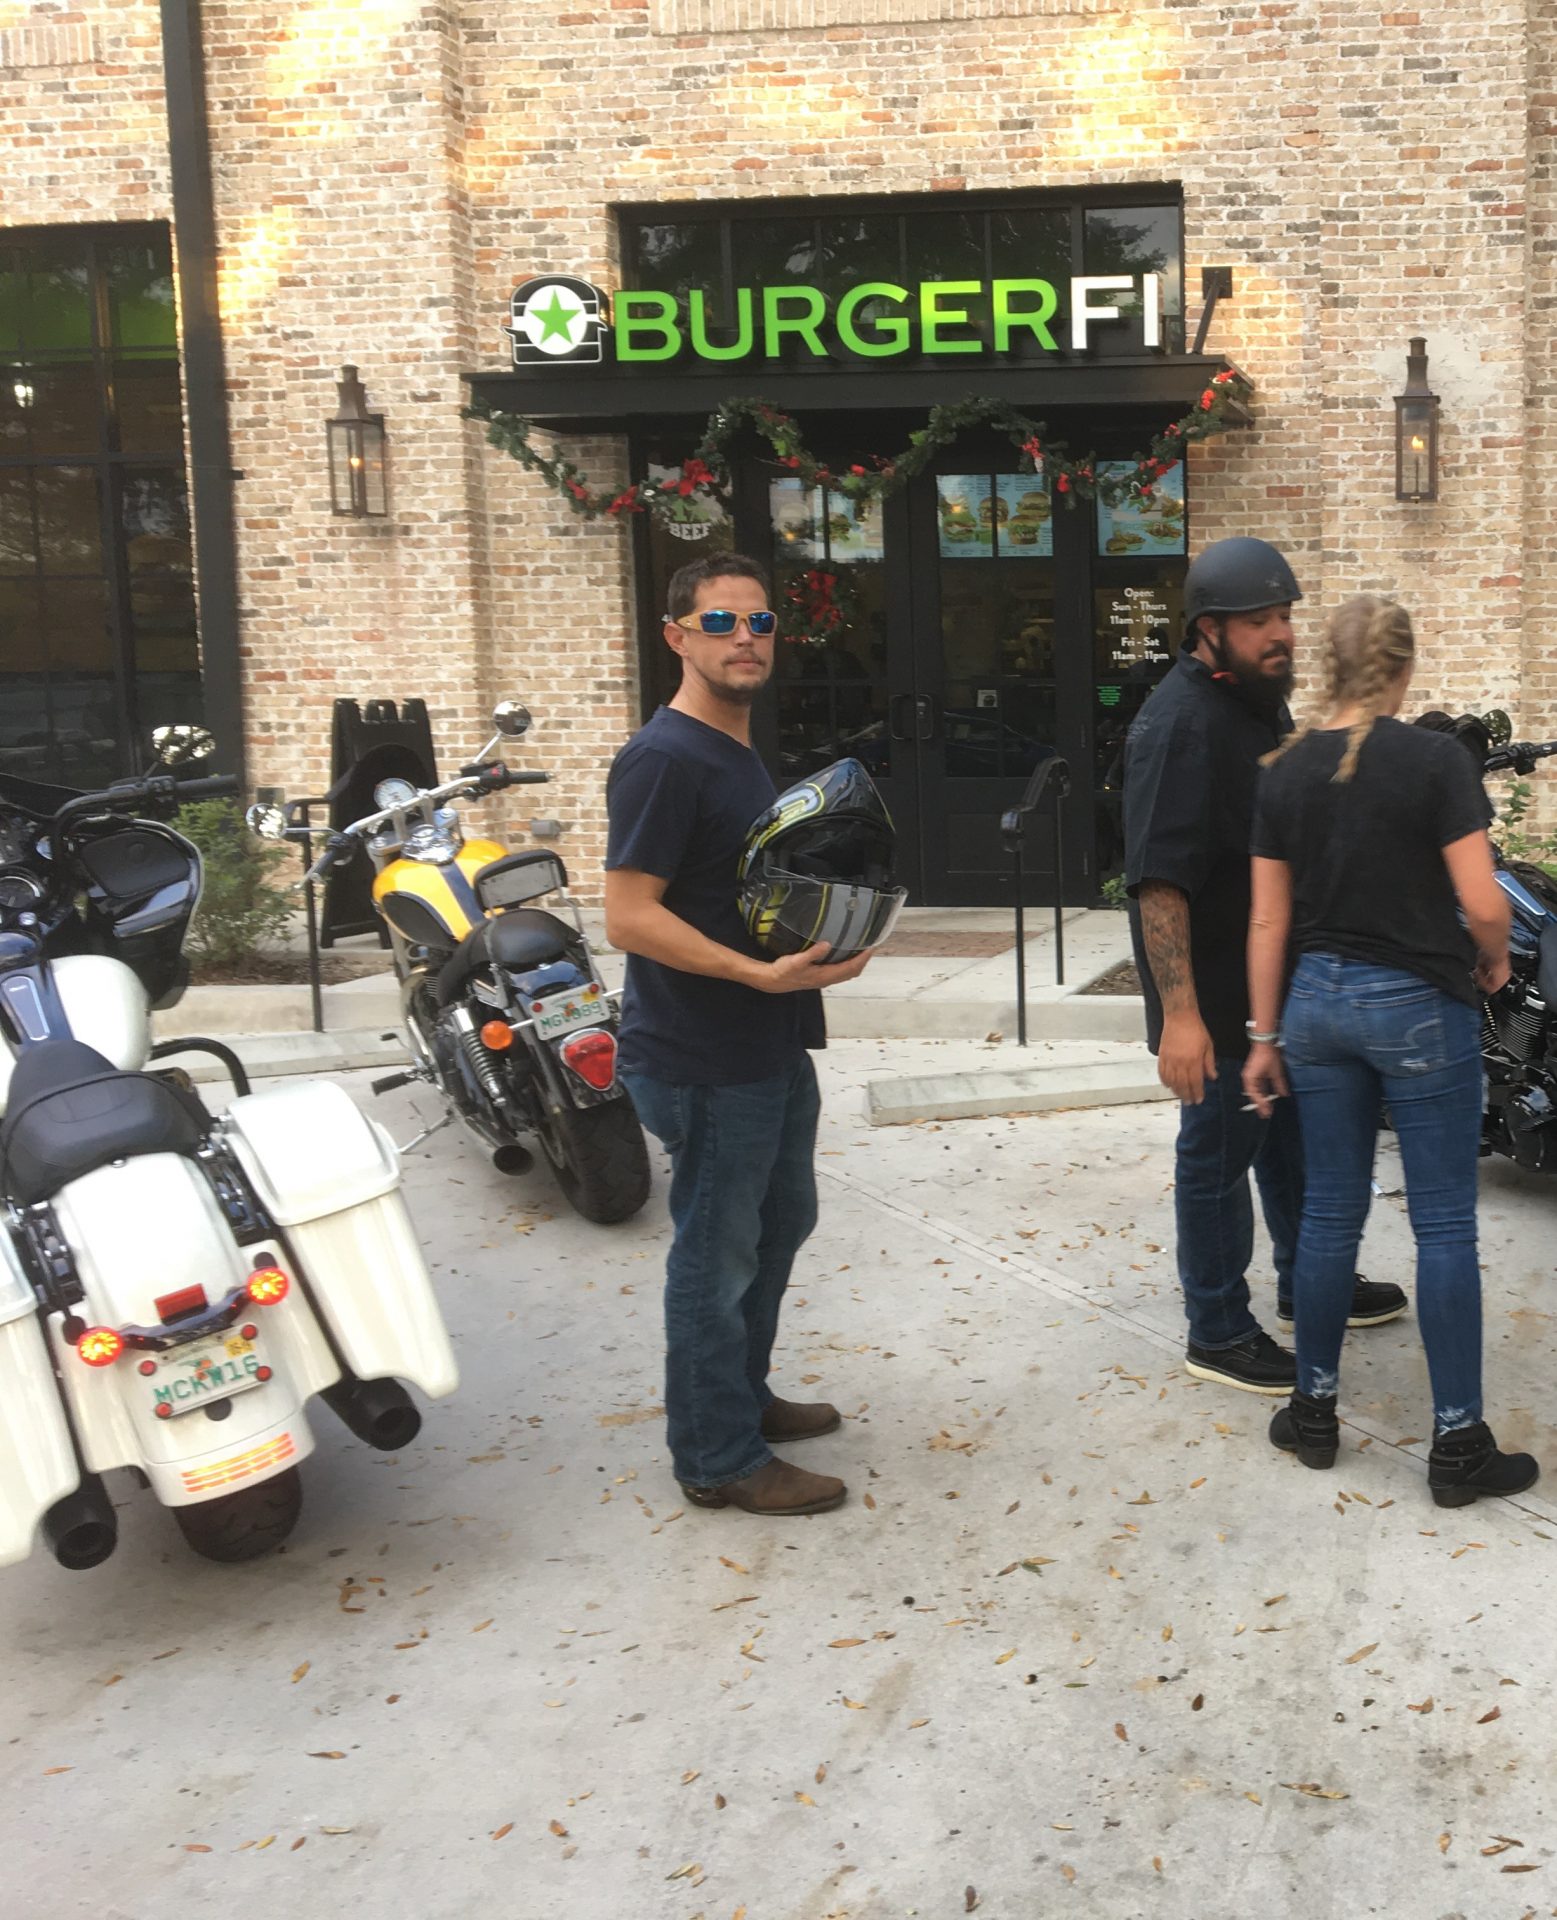 Stephen riding Harleys with Michael, Rob and Monica.  Stopping for lunch.